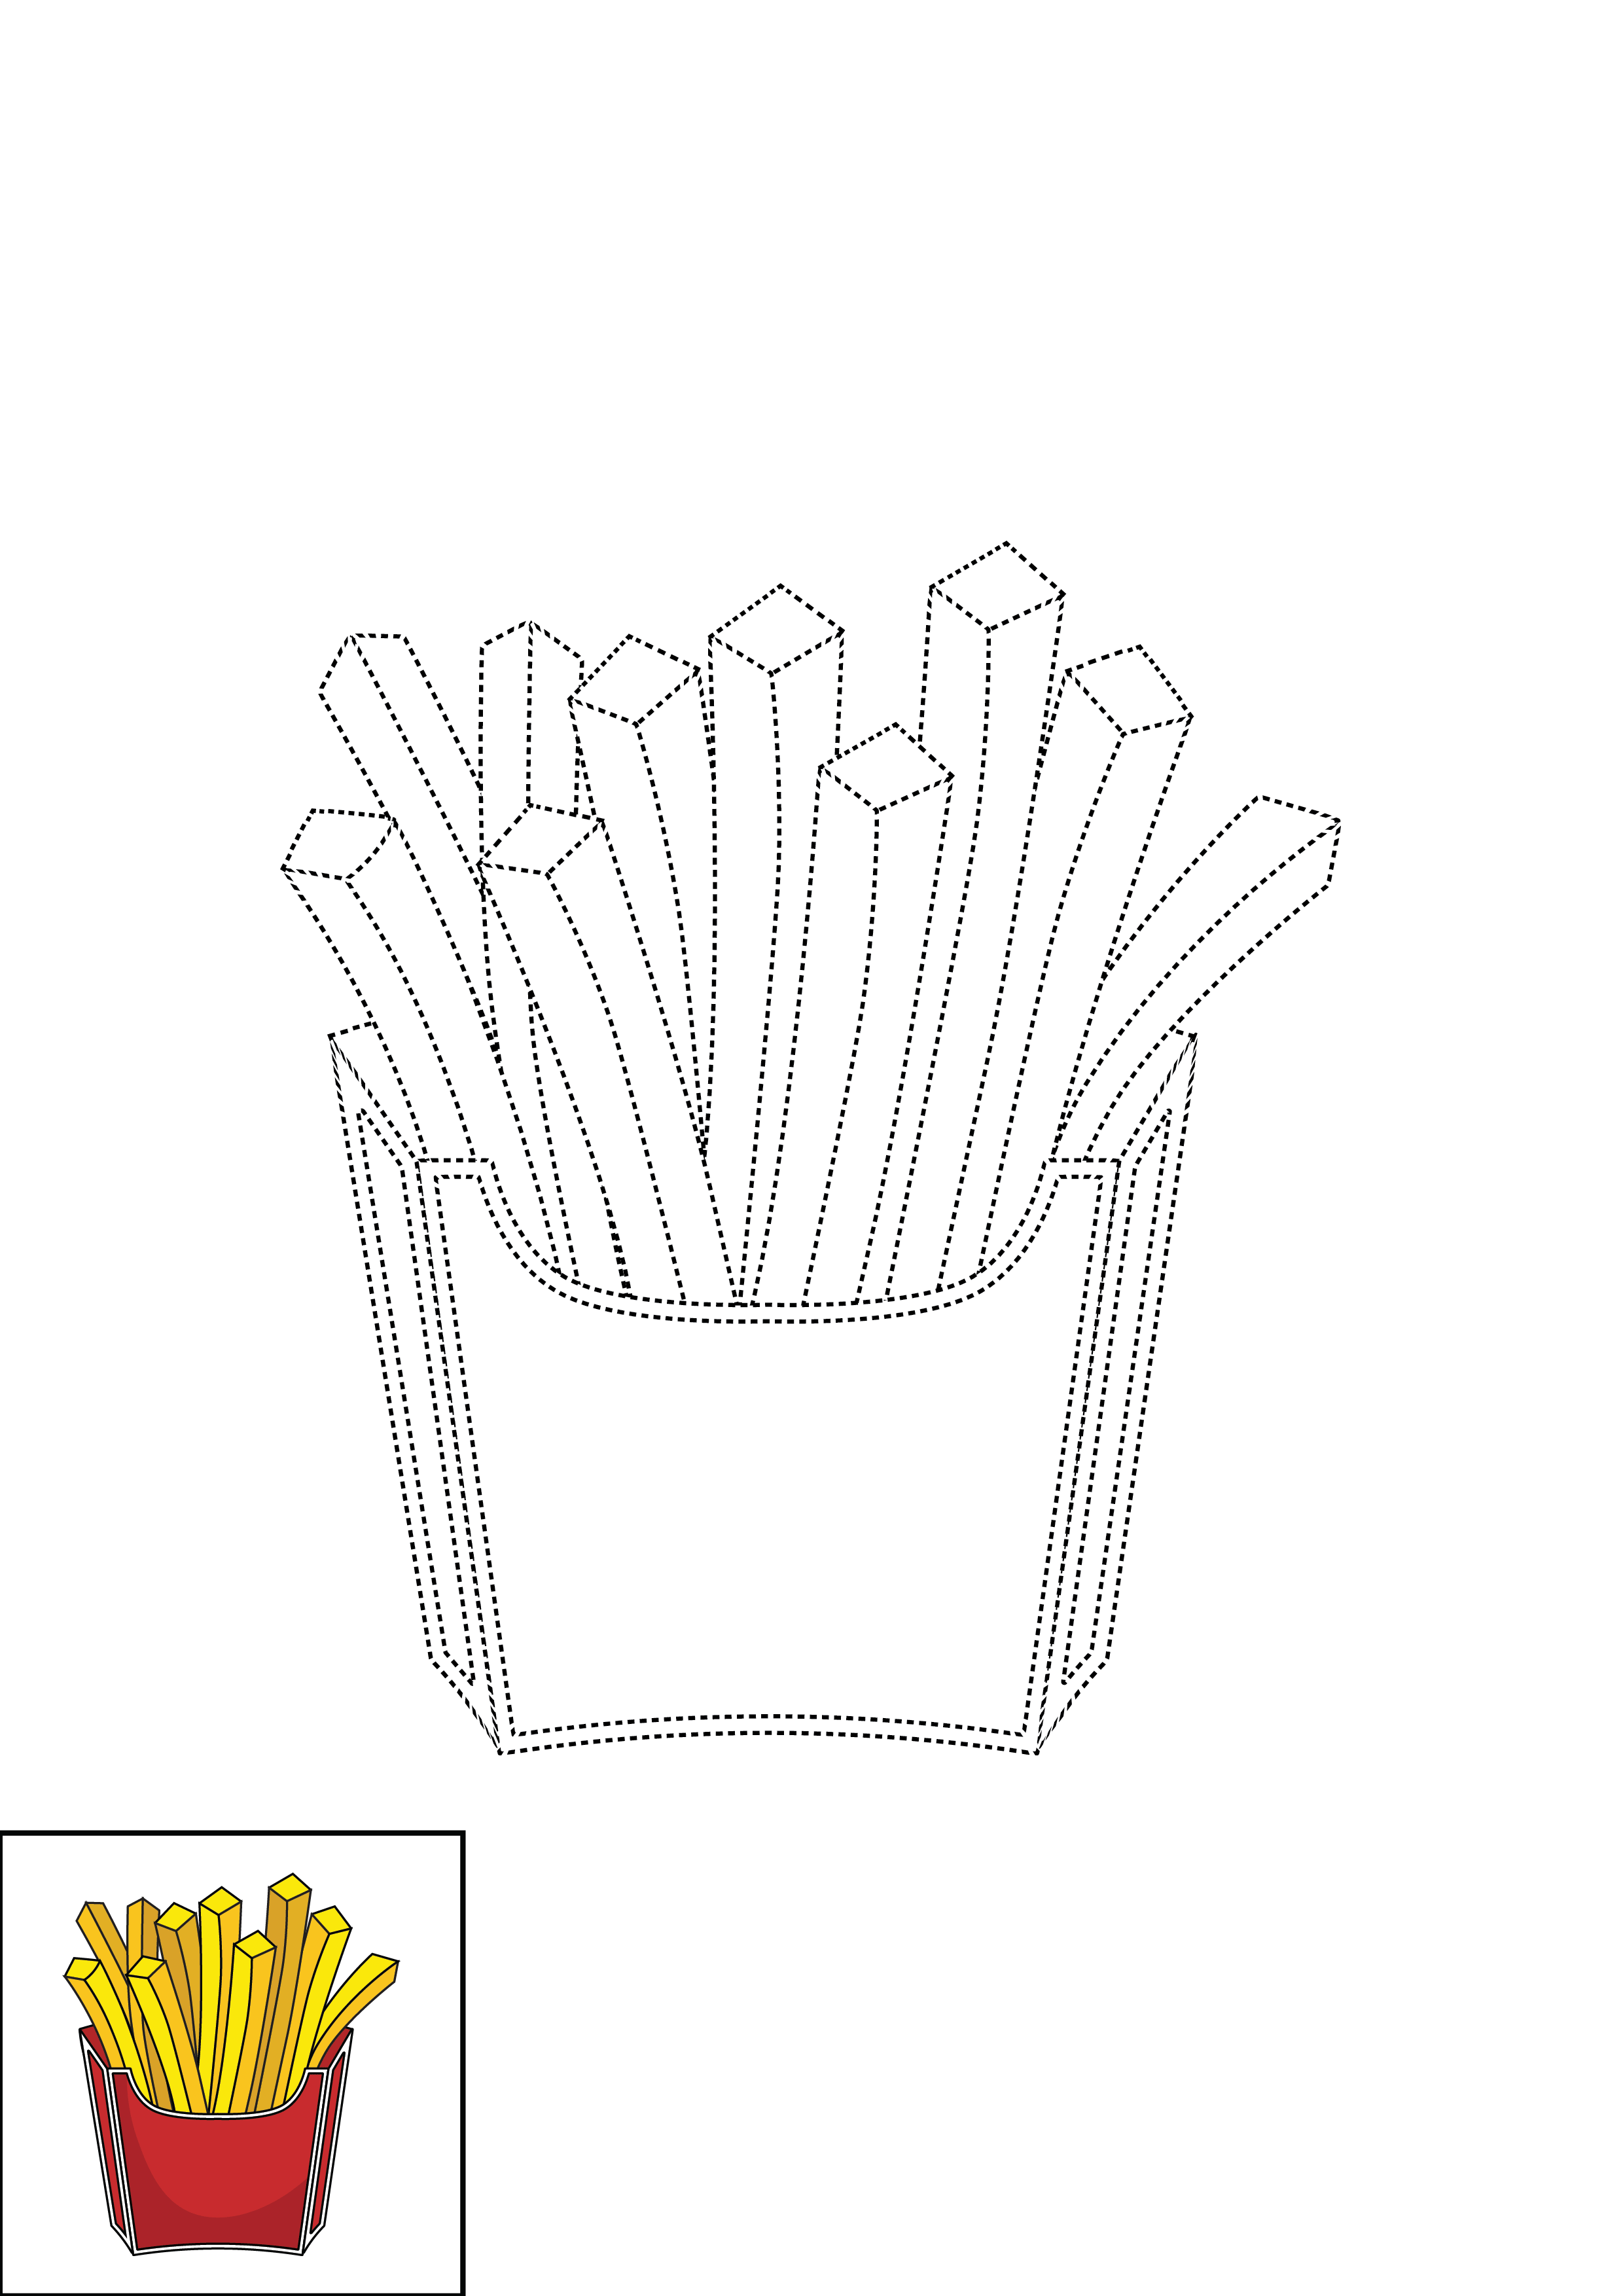 How to Draw French Fries Step by Step Printable Dotted